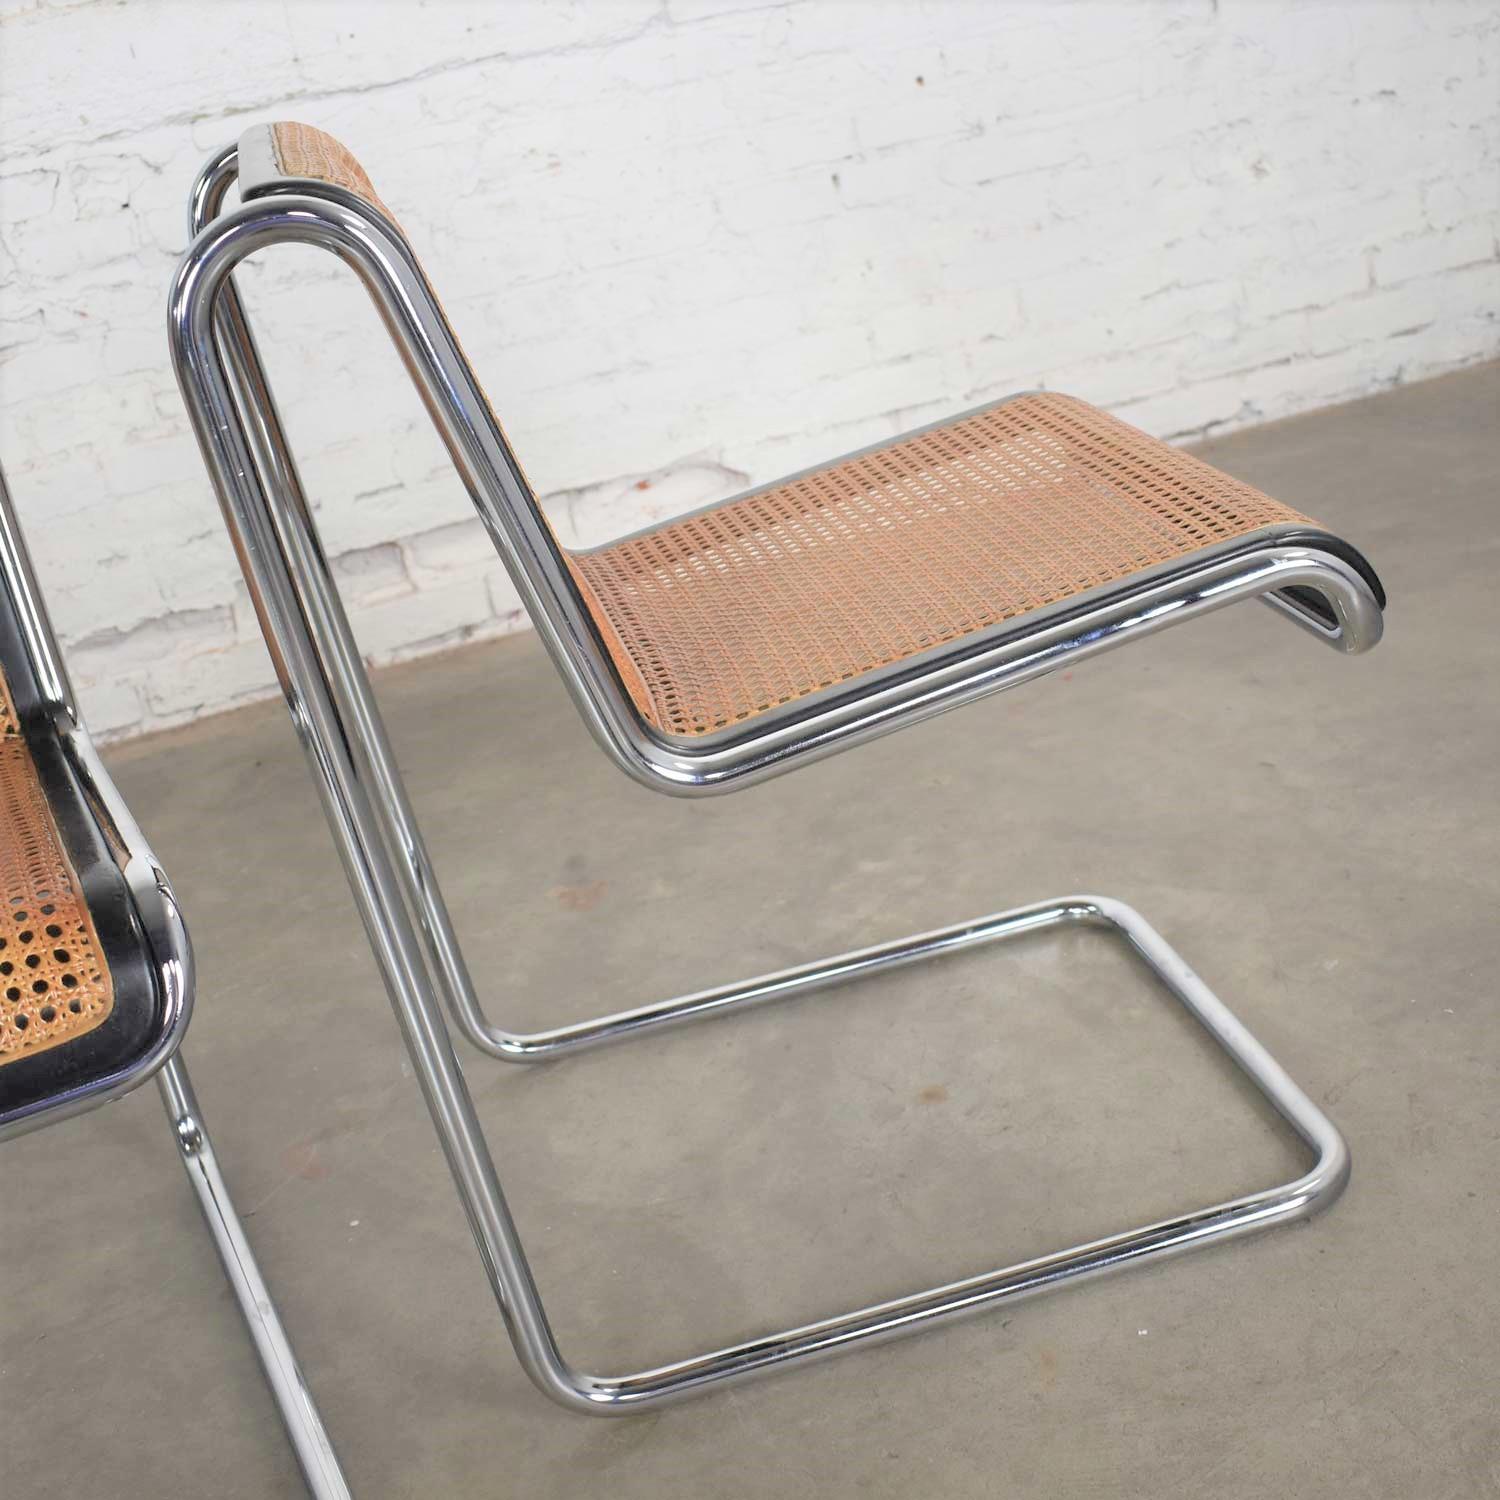 Thonet Bauhaus Style Reverse Cantilever Chairs in Chrome Black Cane by Umanoff 1